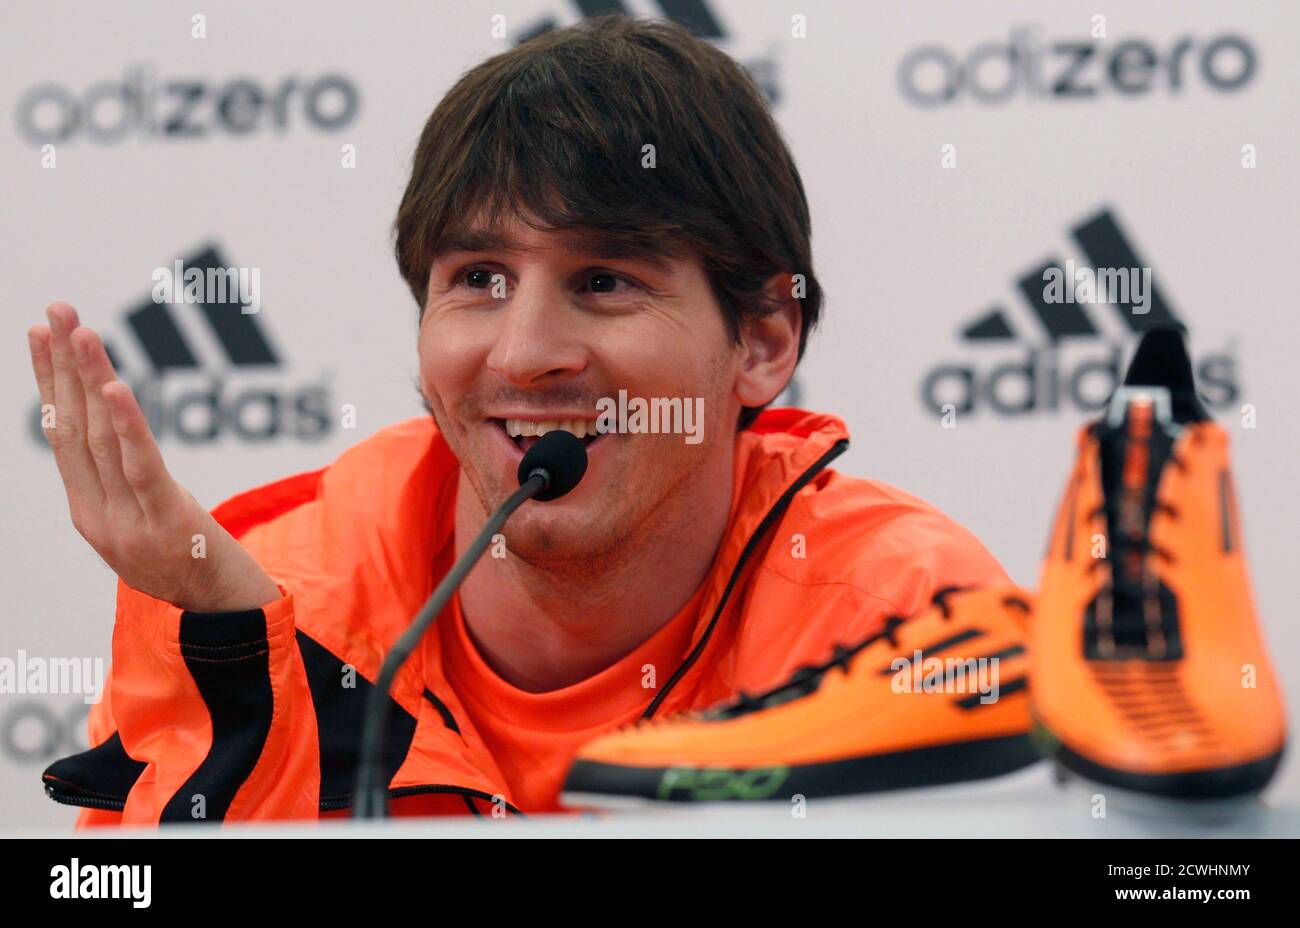 Barcelona's soccer player Lionel Messi of Argentina speaks as he presents  his Adidas adiZero F50 shoes